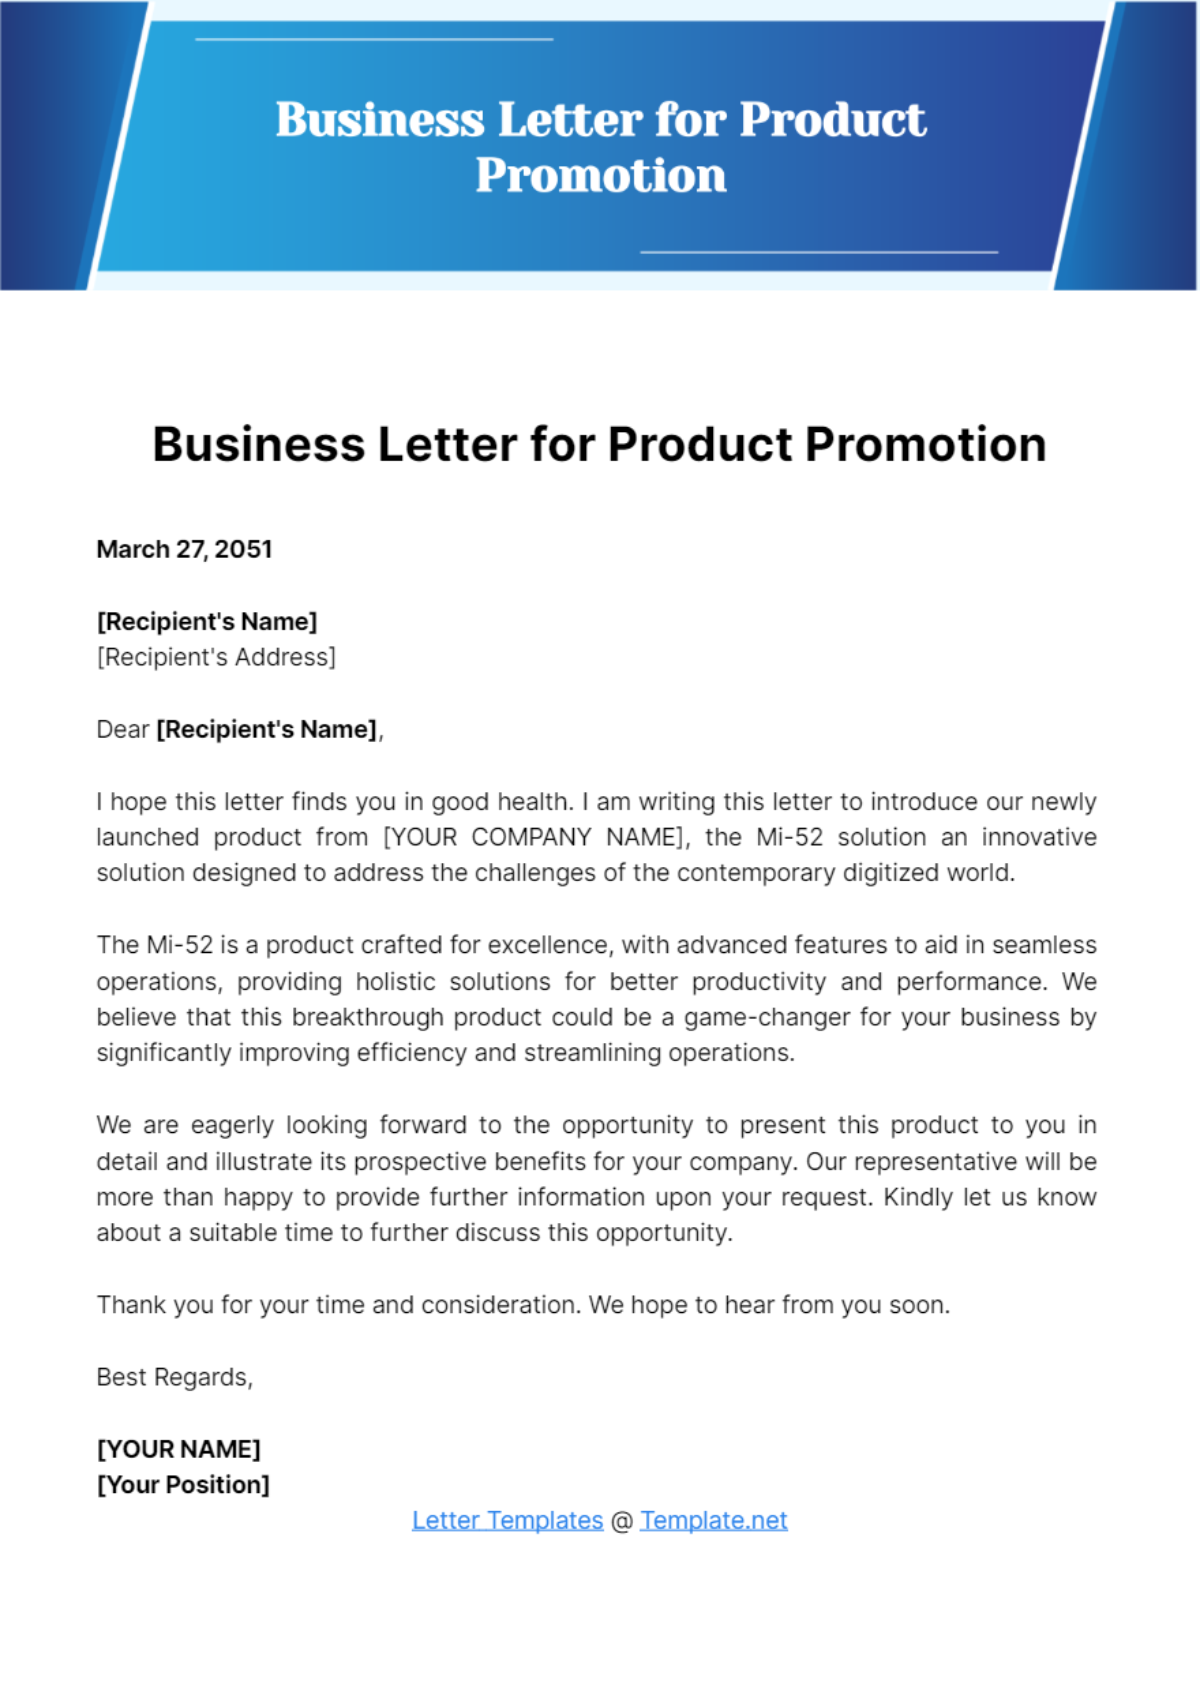 Free Business Letter for Product Promotion Template